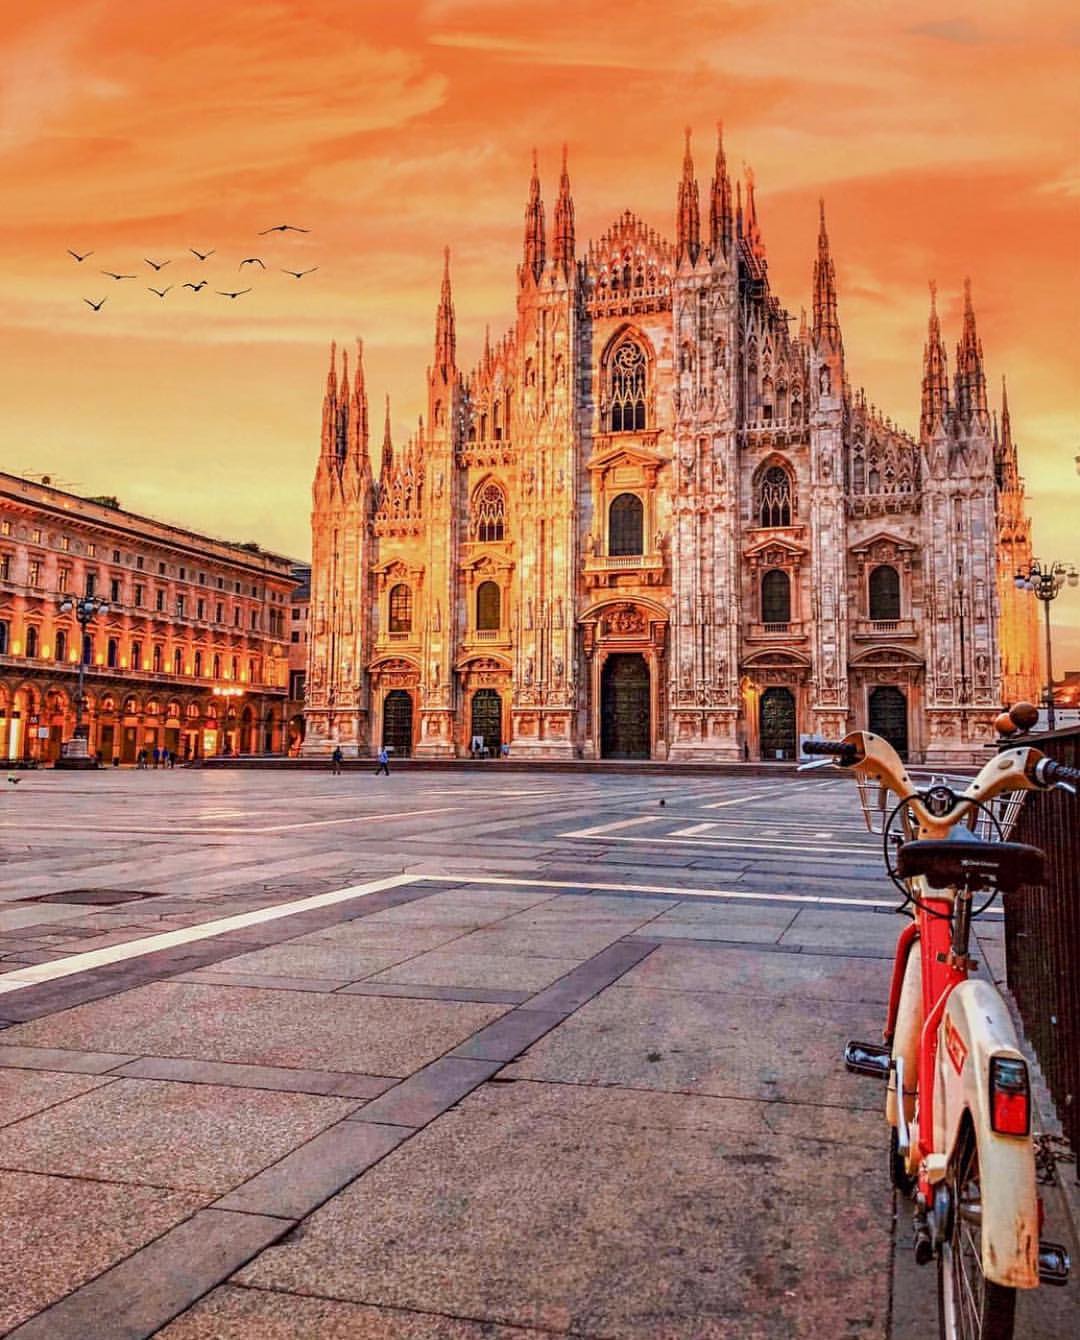 Sunset in Milan, Italy – Cleavage World Shots